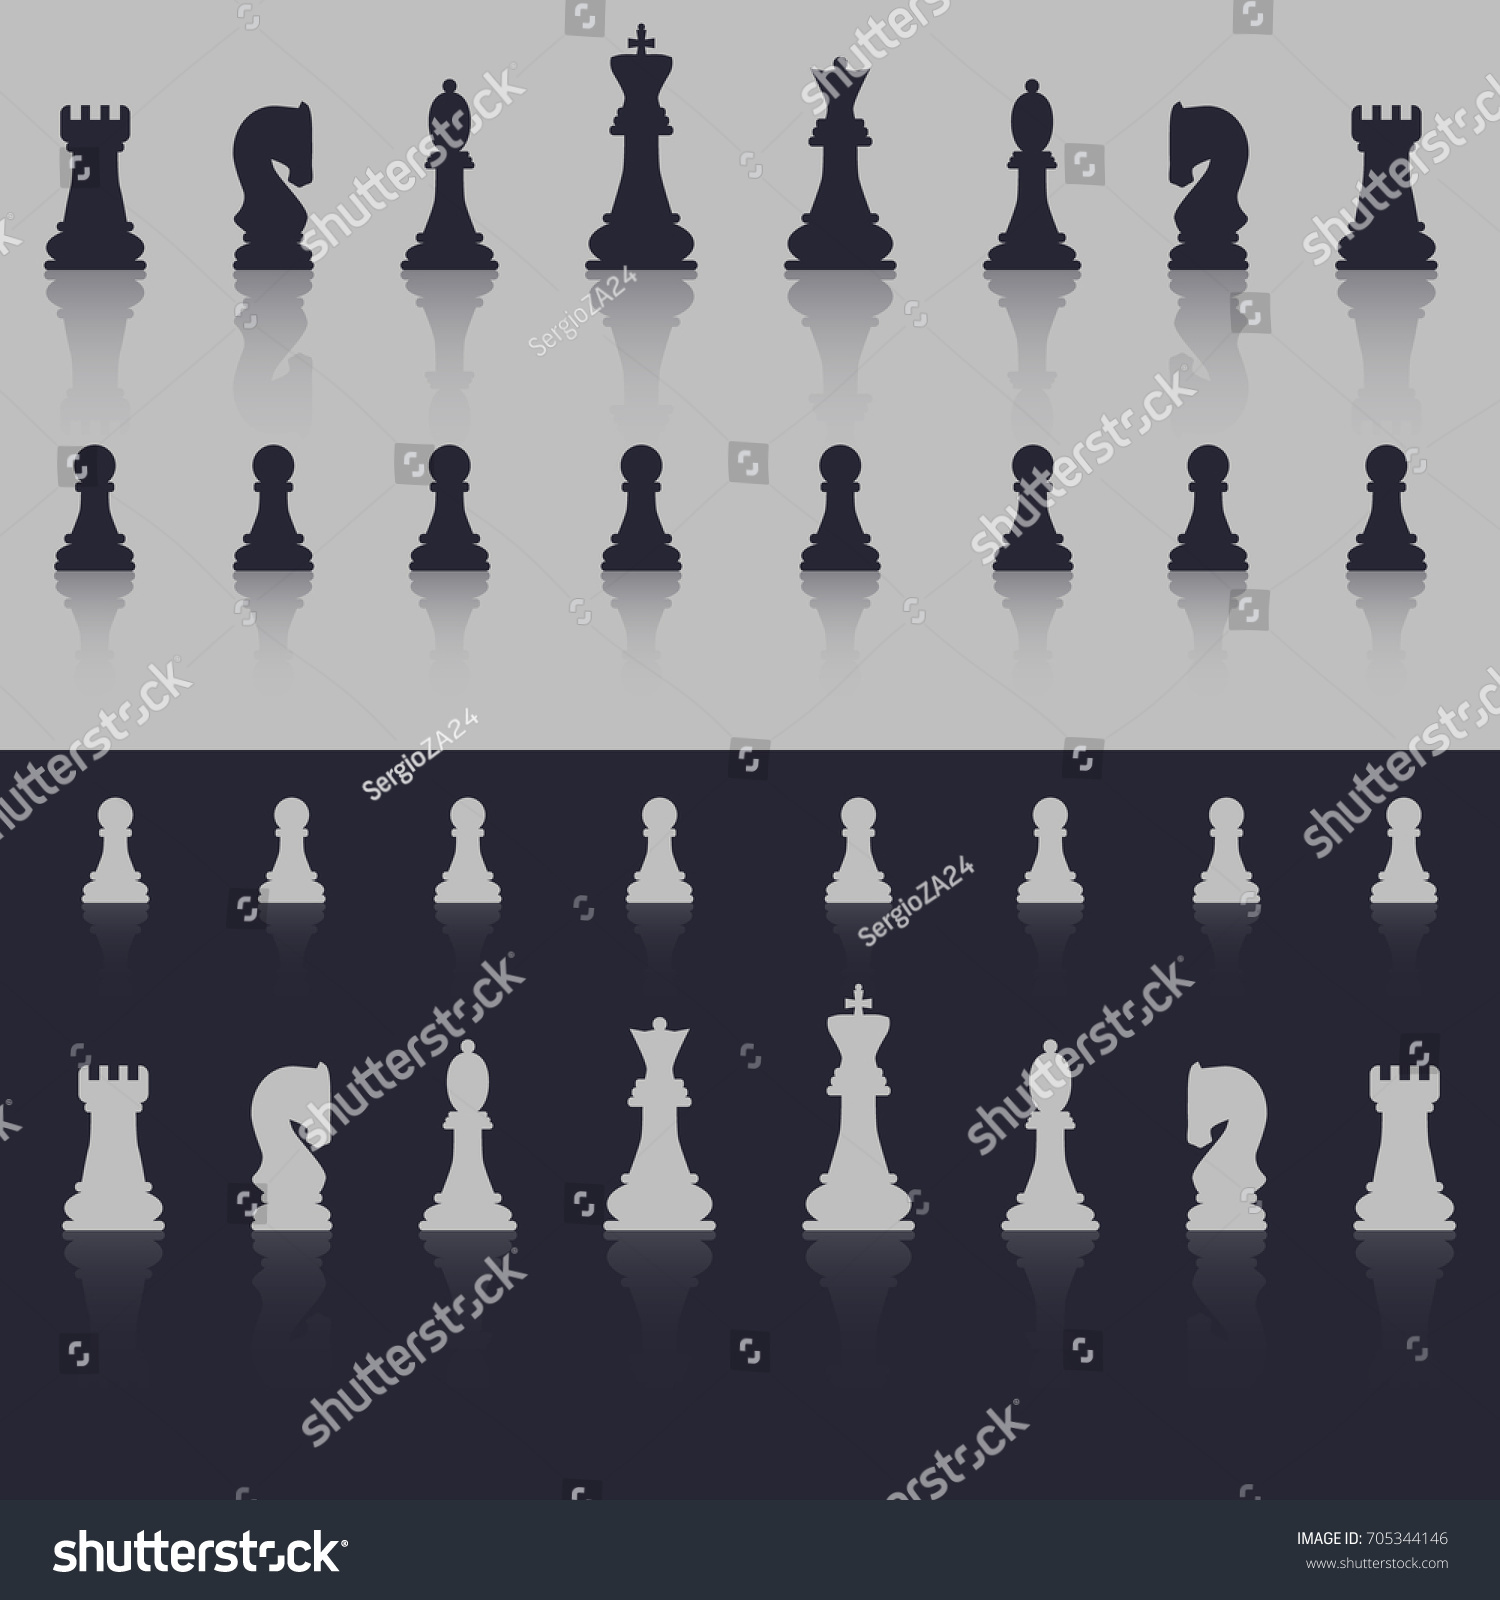 SVG of All figures are chess. In cold shades, with a shadow in the form of reflection. Flat style. Vector image. svg